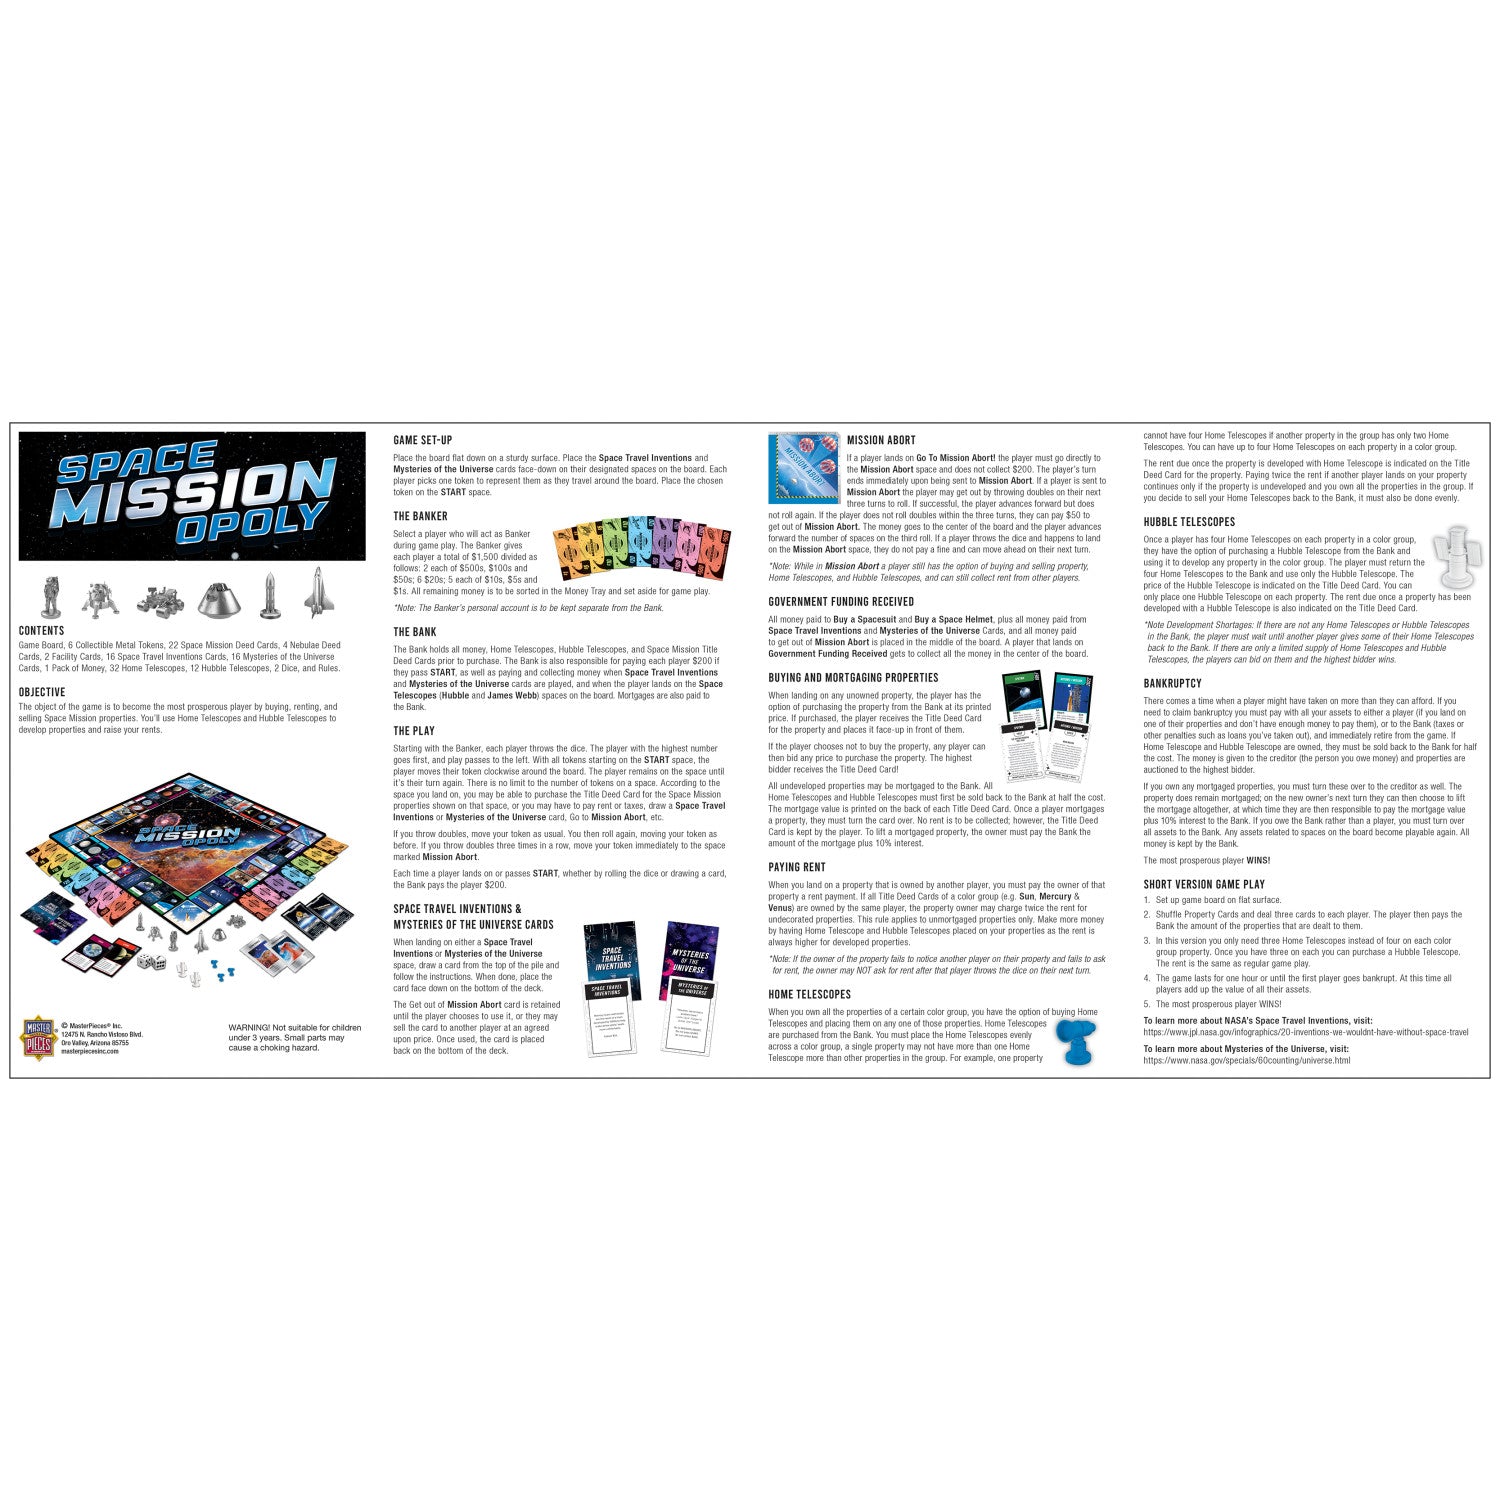 Space Mission Opoly Board Game